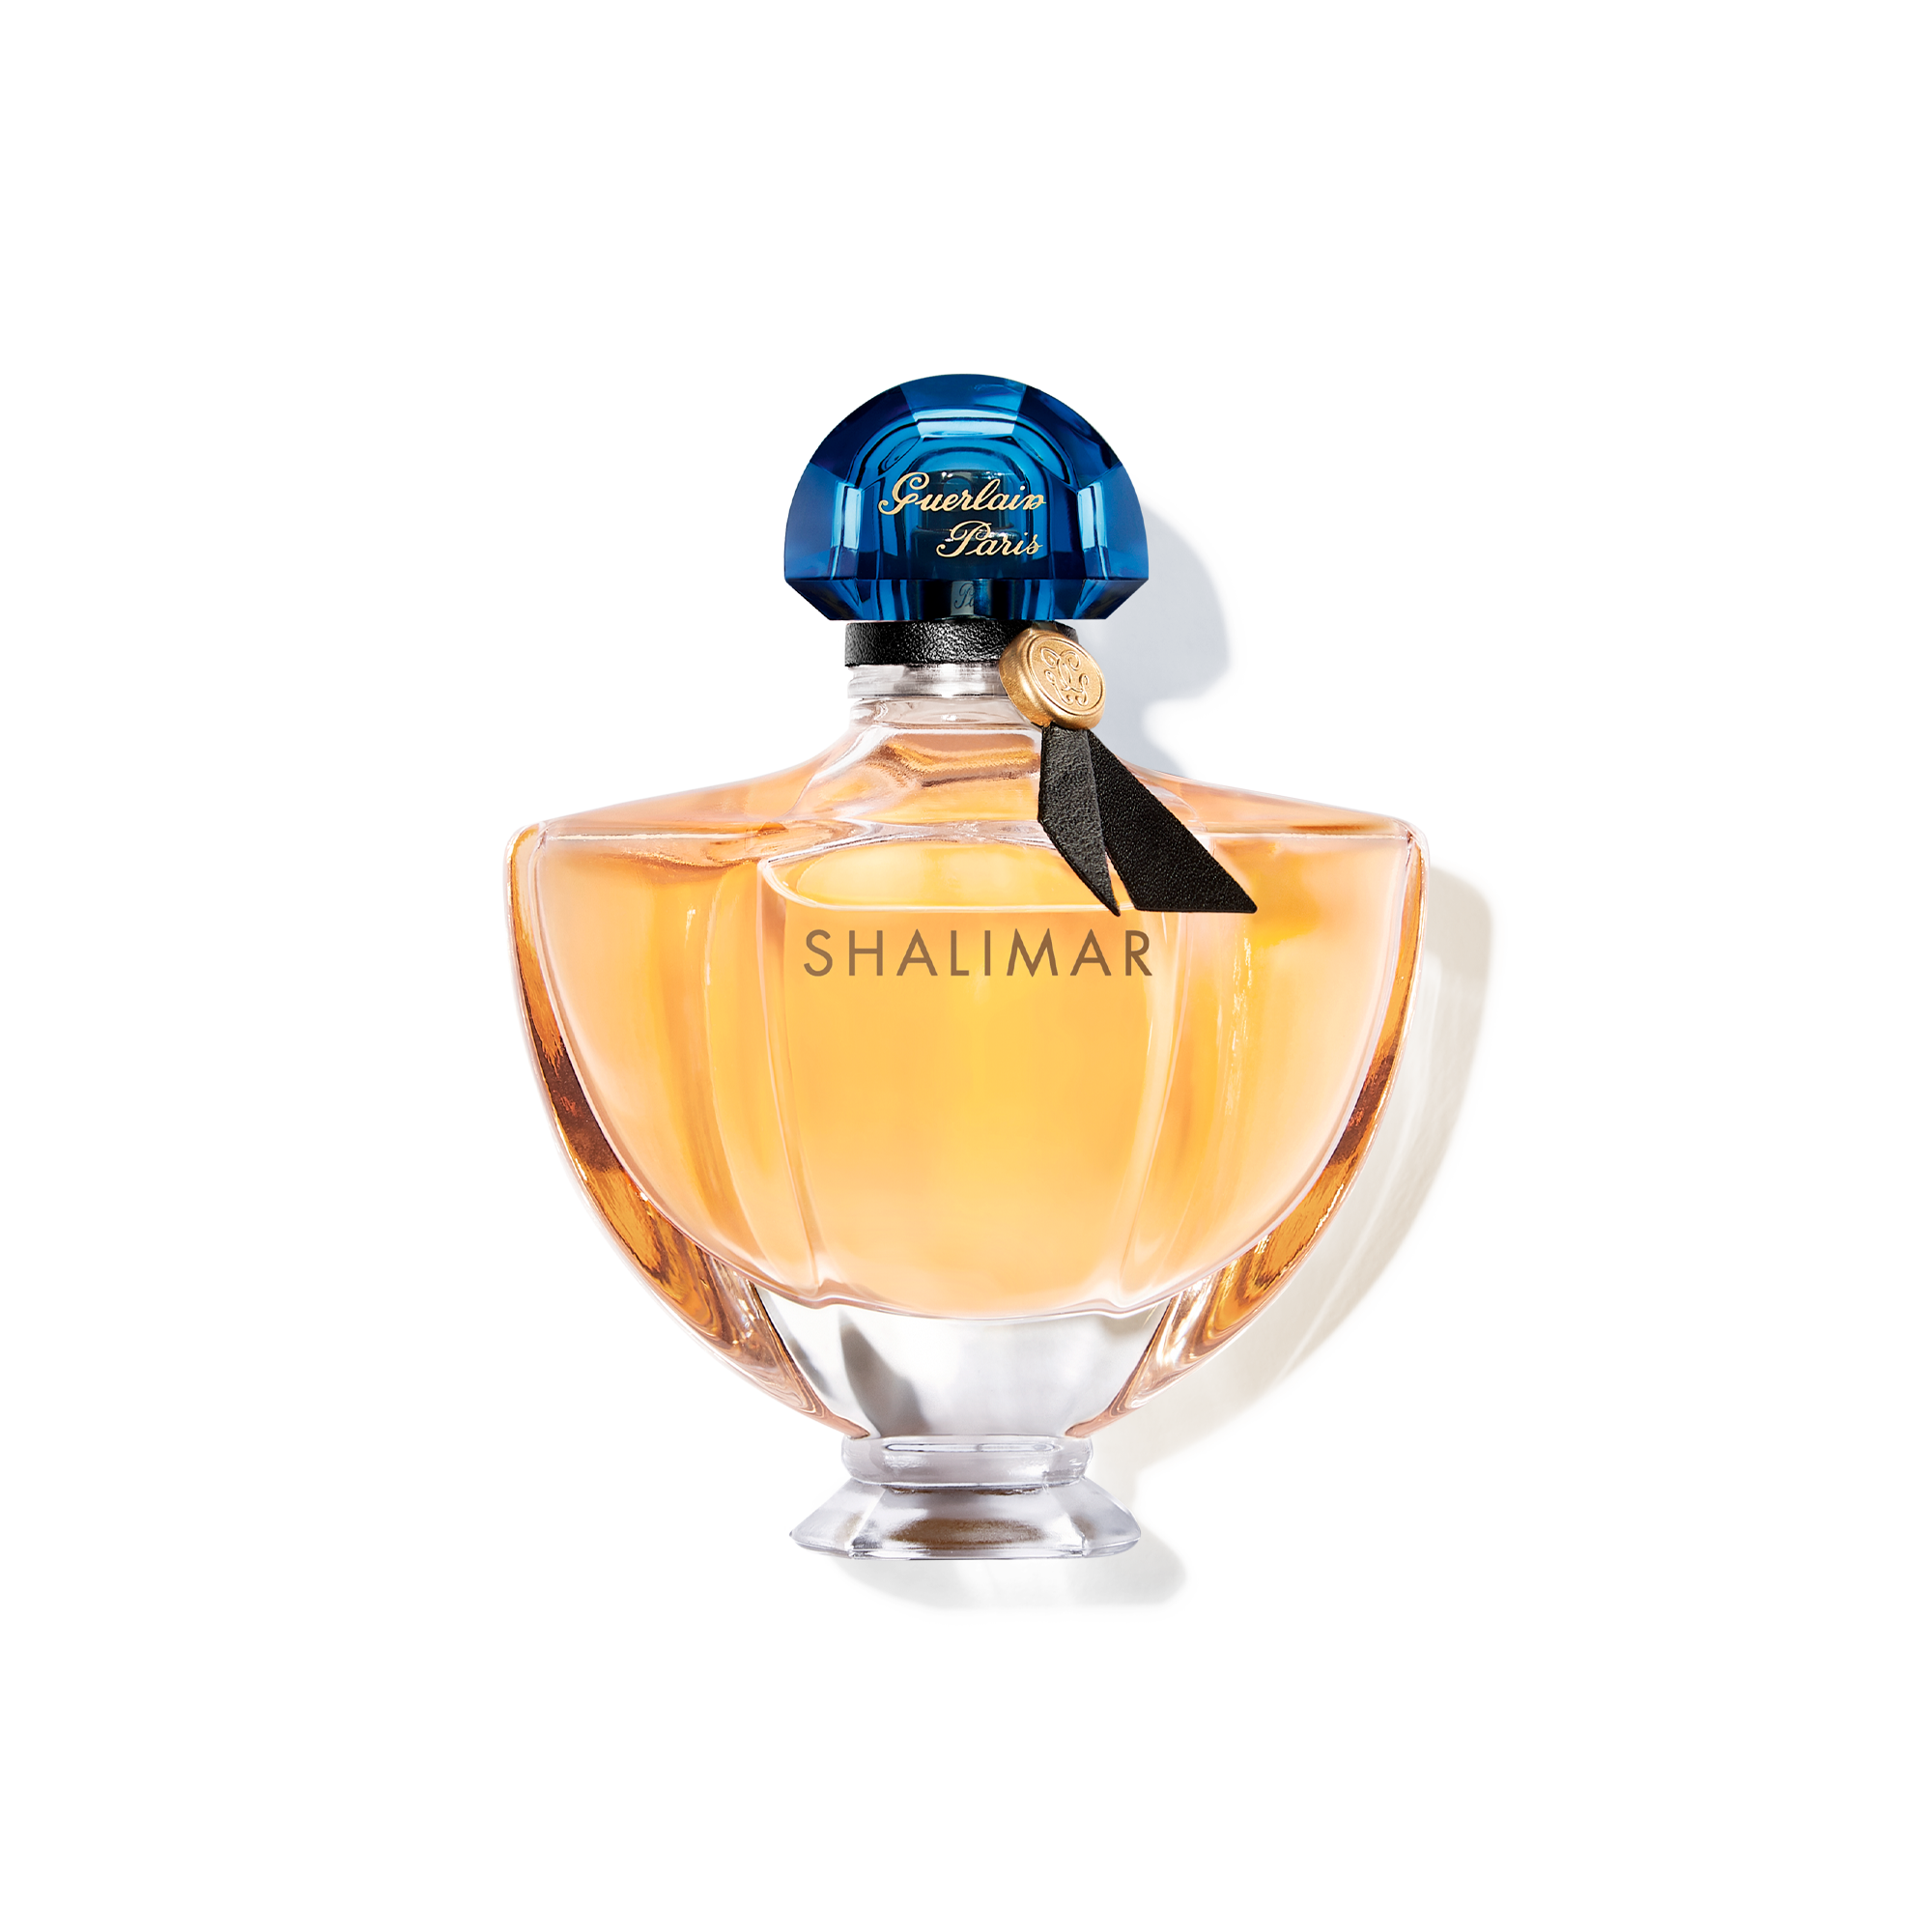 Guerlain Shalimar: The Timeless Oriental - Cult Fragrances: Scents That Have Achieved Iconic Status